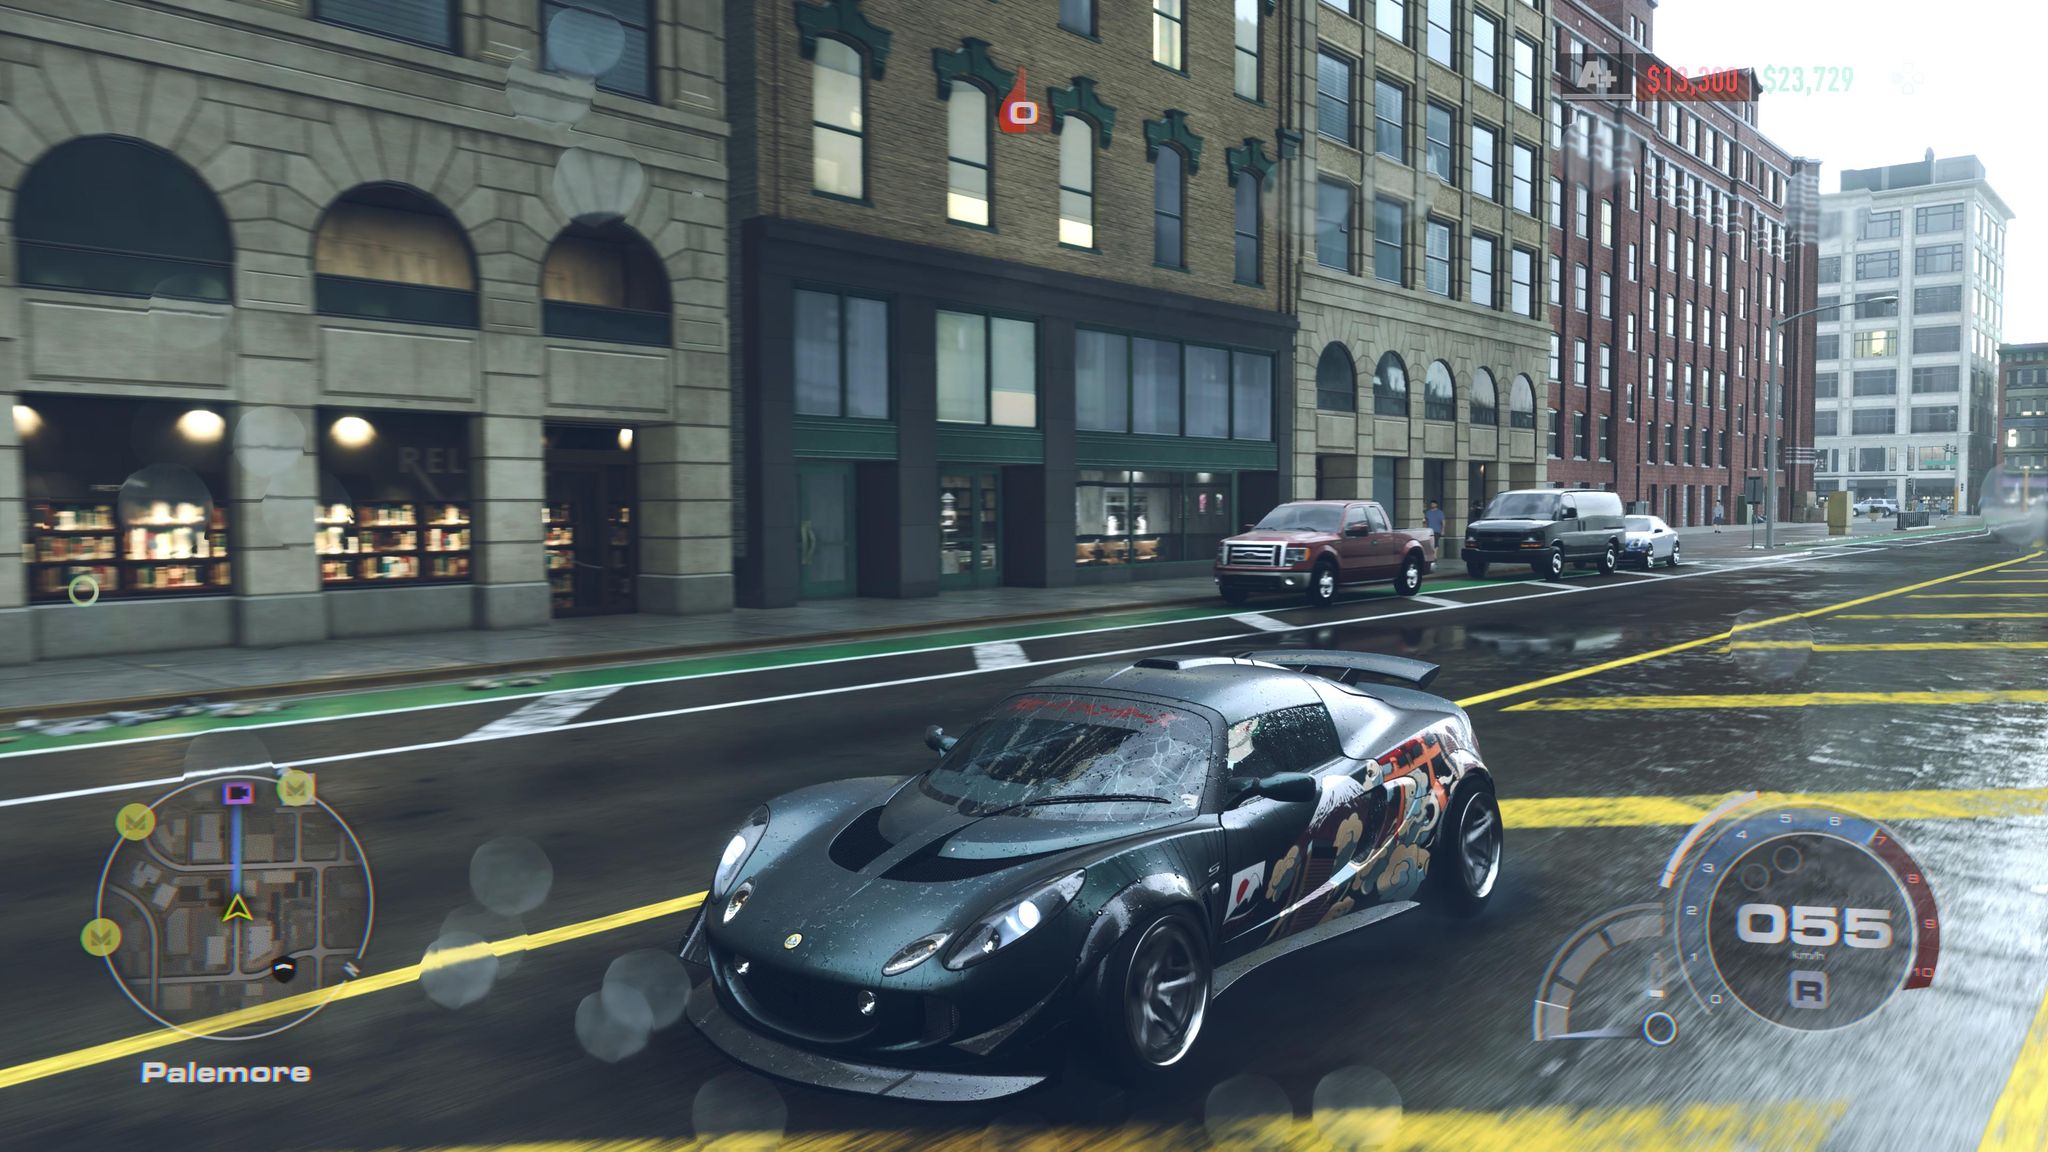 Need for Speed Unbound review: compelling hook elevates stylish